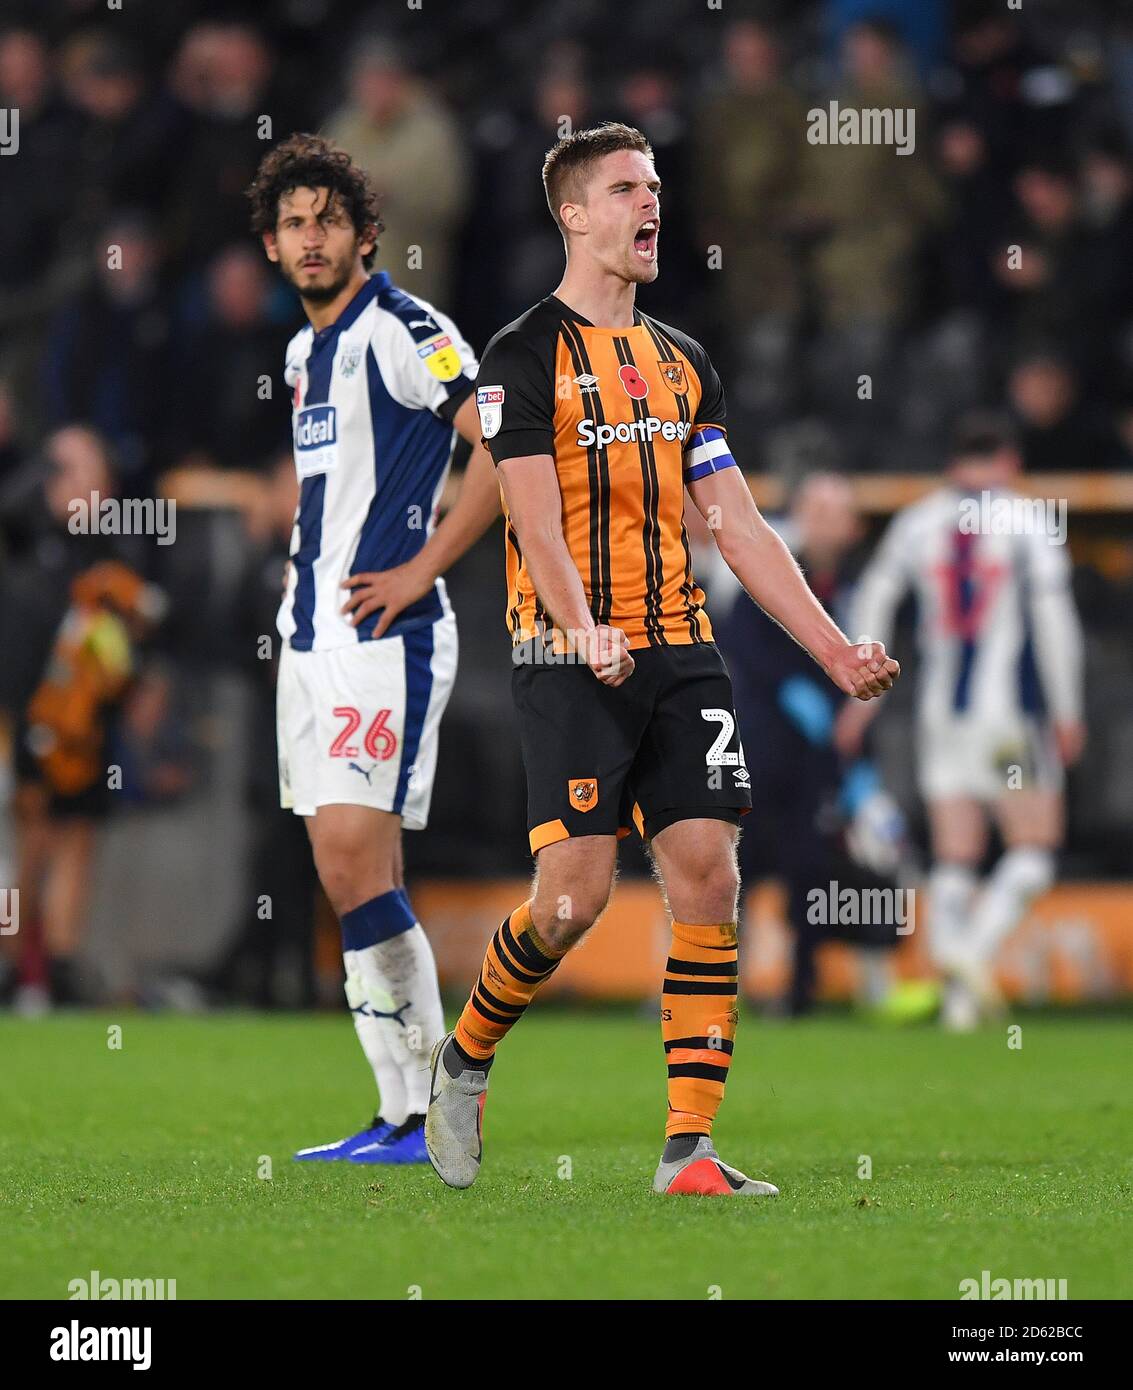 Hull City's Markus Henriksen celebrates as West Bromwich Albion's Ahmed Hegazy appears dejected in the background Stock Photo